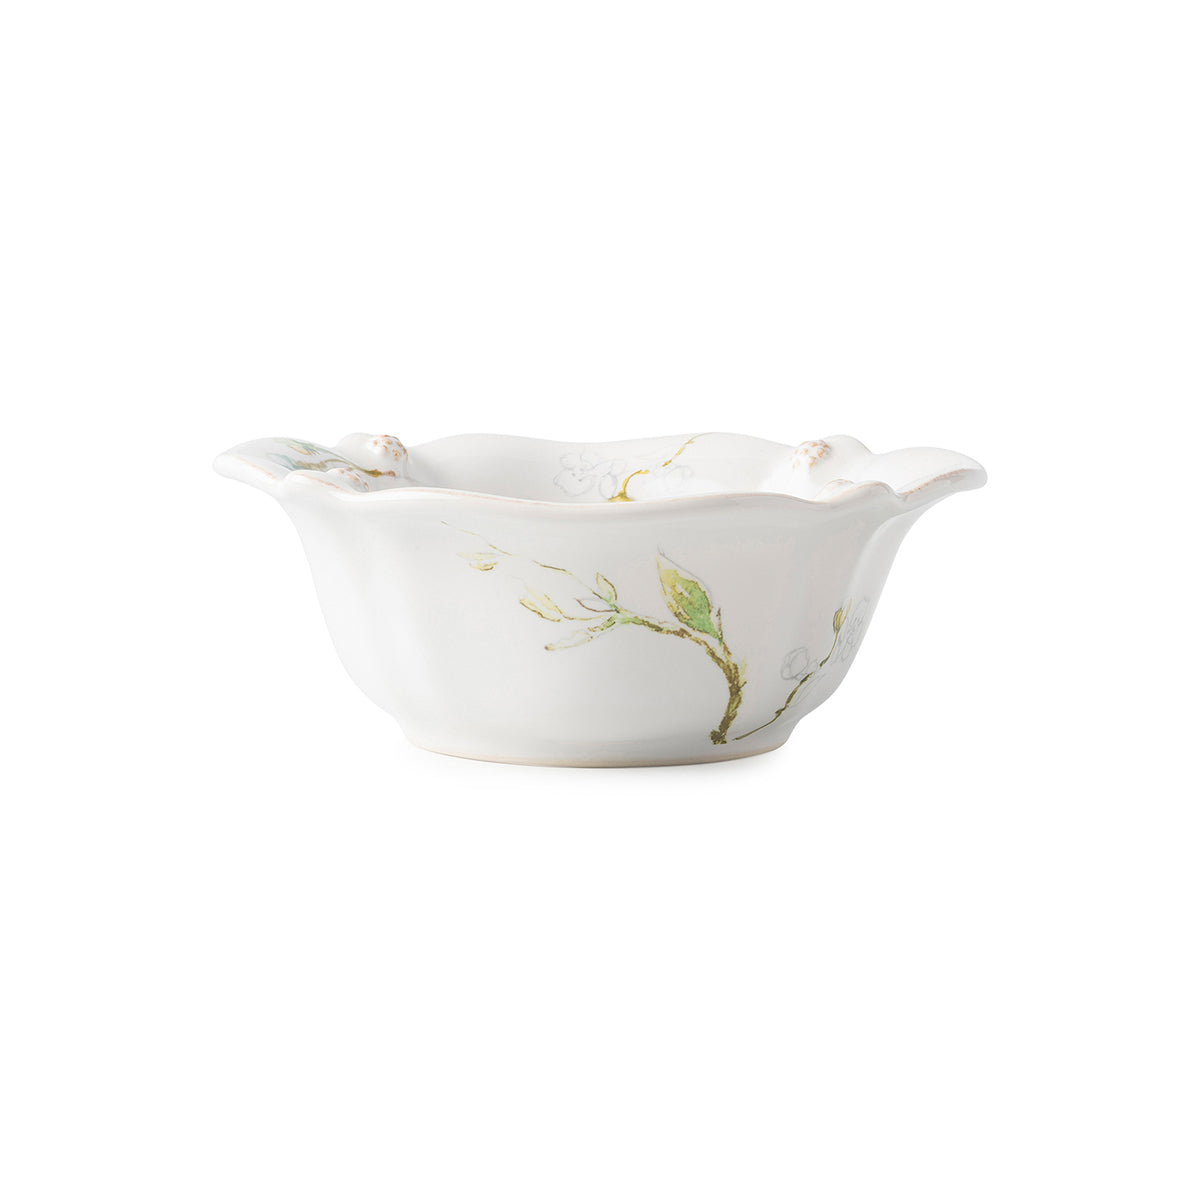 From our Berry & Thread Collection, this subtly scalloped, deep cereal or ice cream bowl ties in our new Jasmine imagery.